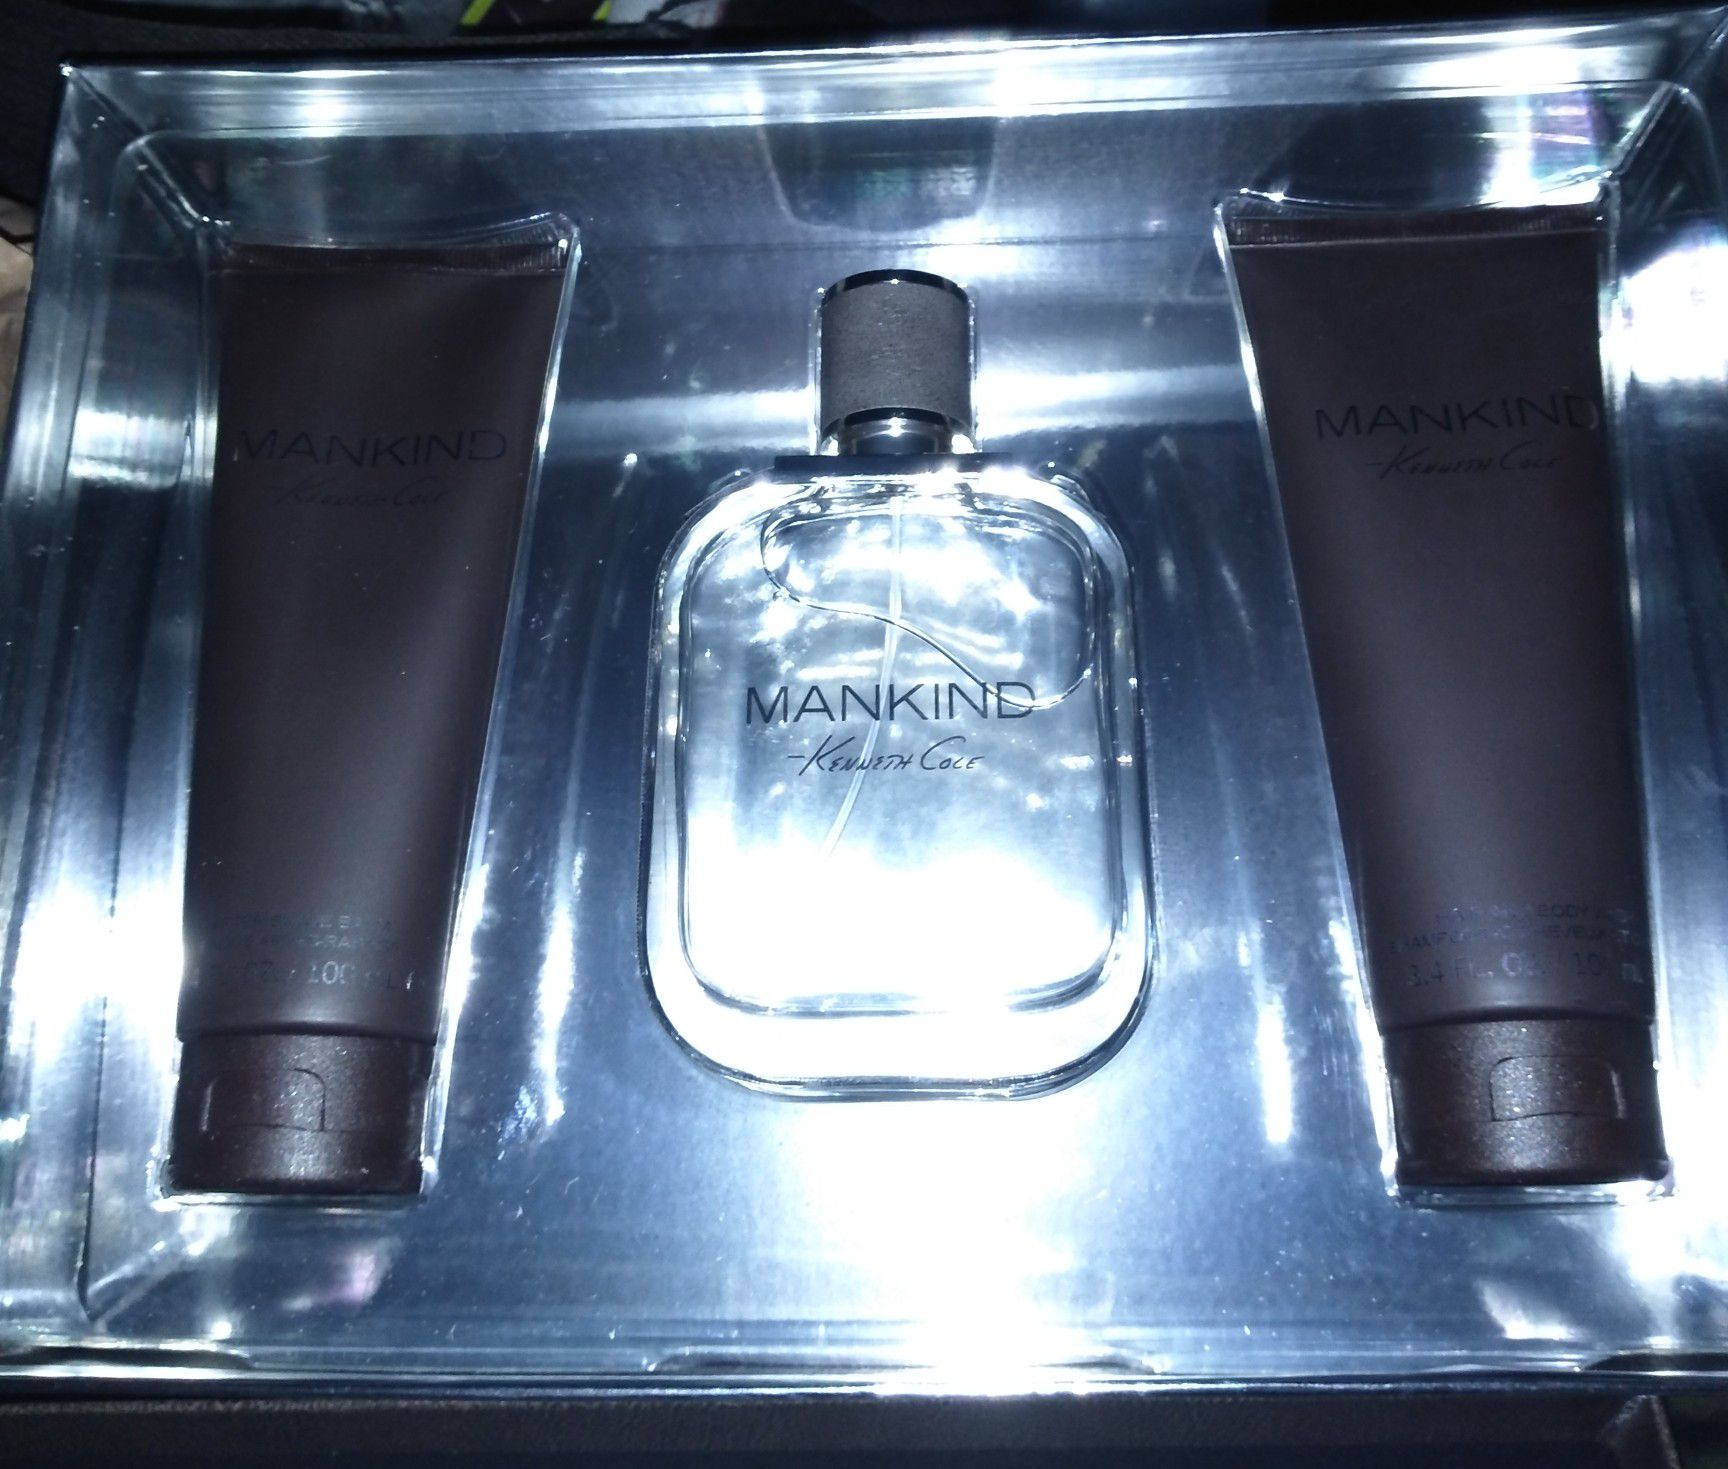 KENNETH COLE 3.4OZ MEN'S COLOGNE GIFT SET!! BRAND NEW!!!! RETAIL $75.00 ( OFFER CHEAP!! )